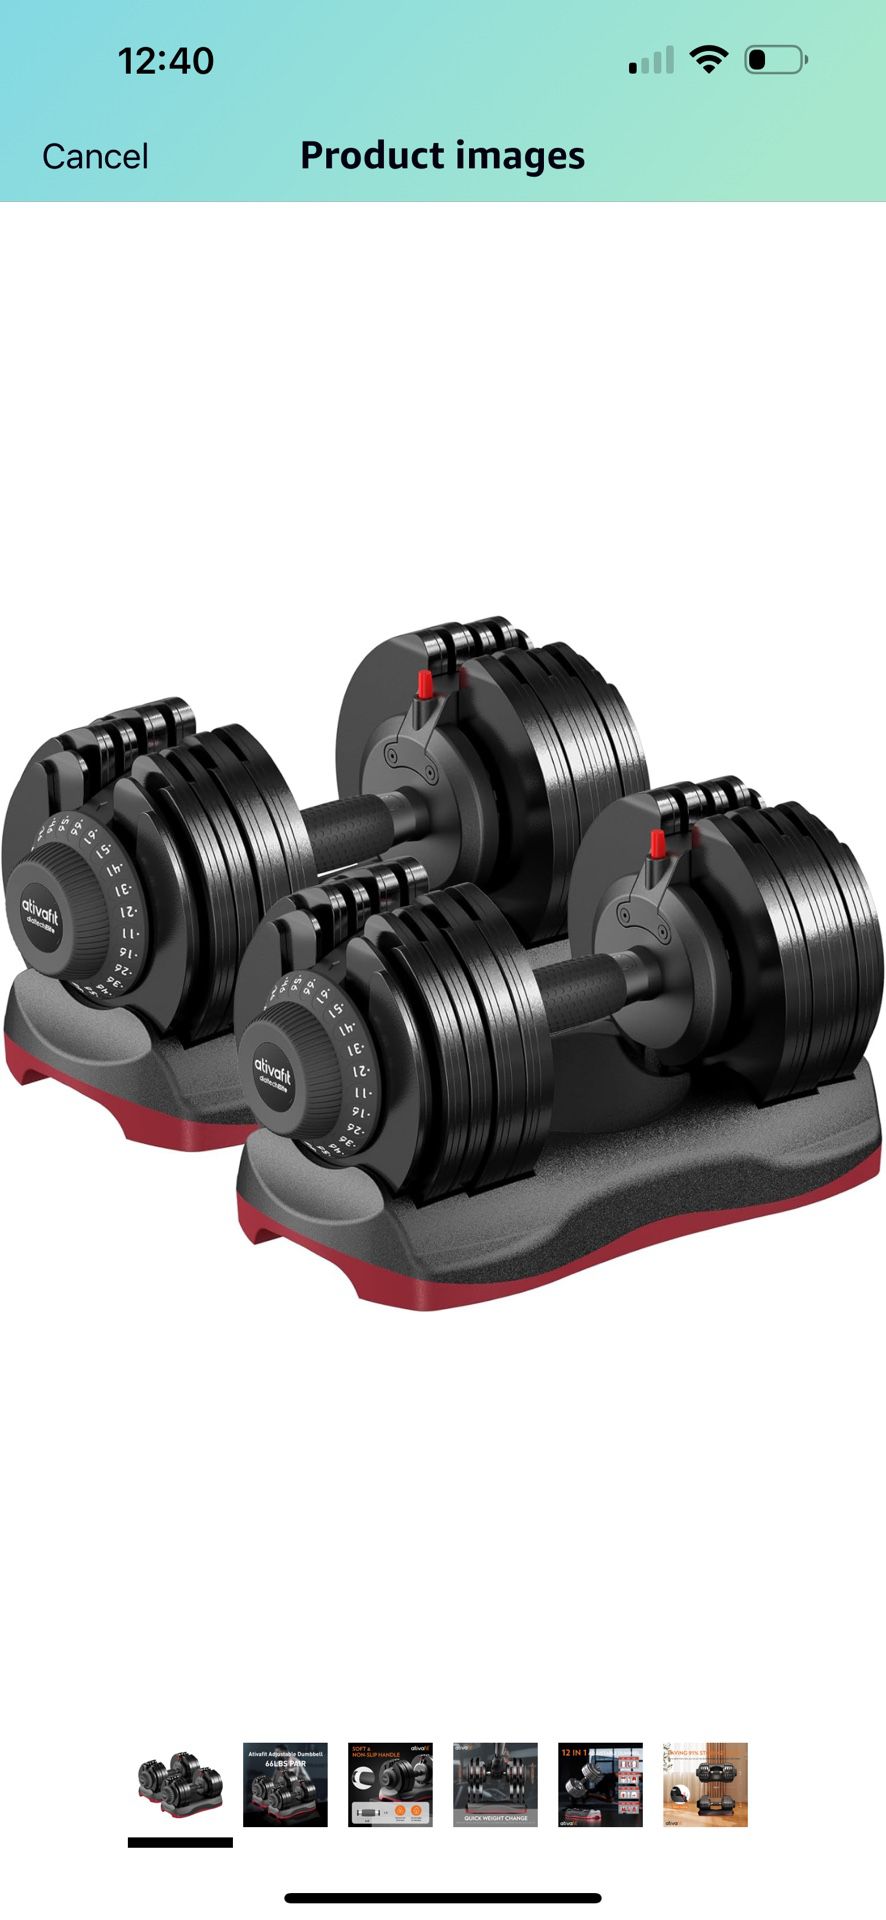 Ativafit 27.5 LBS/ 44LBS/66LBS/88LBS Adjustable Dumbbell Set with Anti-slip Handle 12 In 1 Quick Dial Adjustment Weights With Safety Locking Button Sp